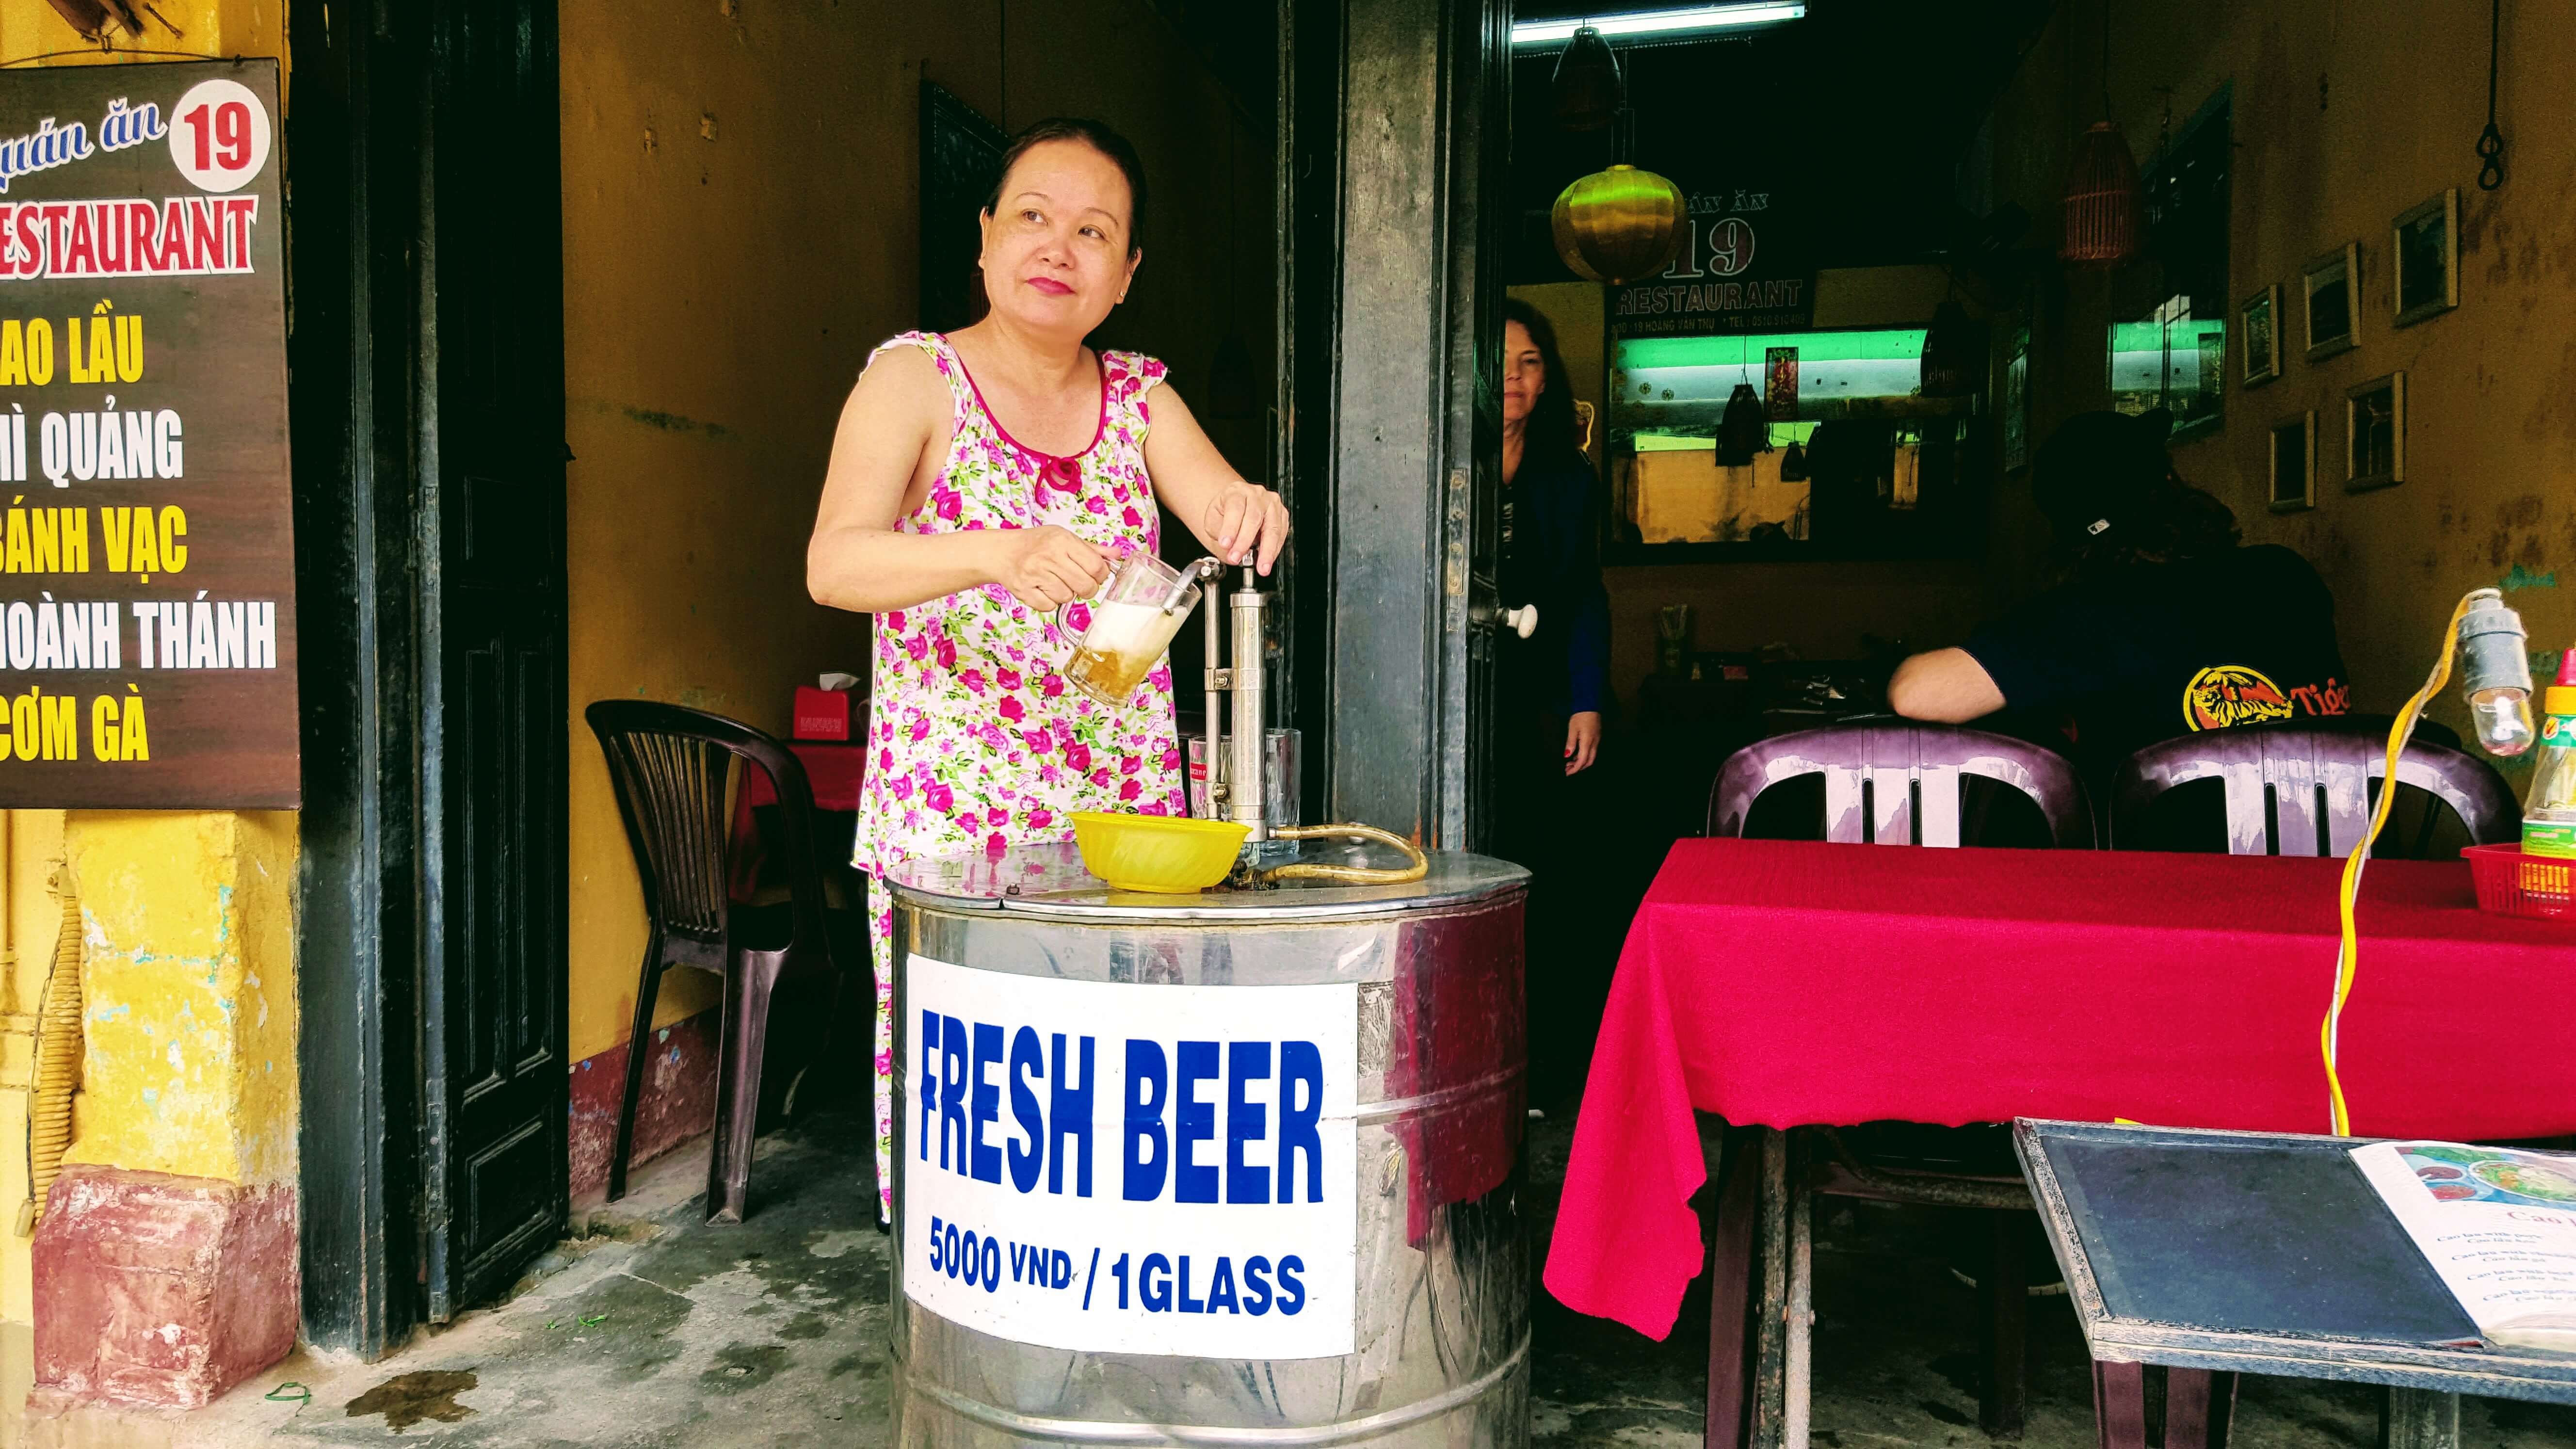 An-image-showing-where-to-find-the-cheapest-beer-in-Hoian